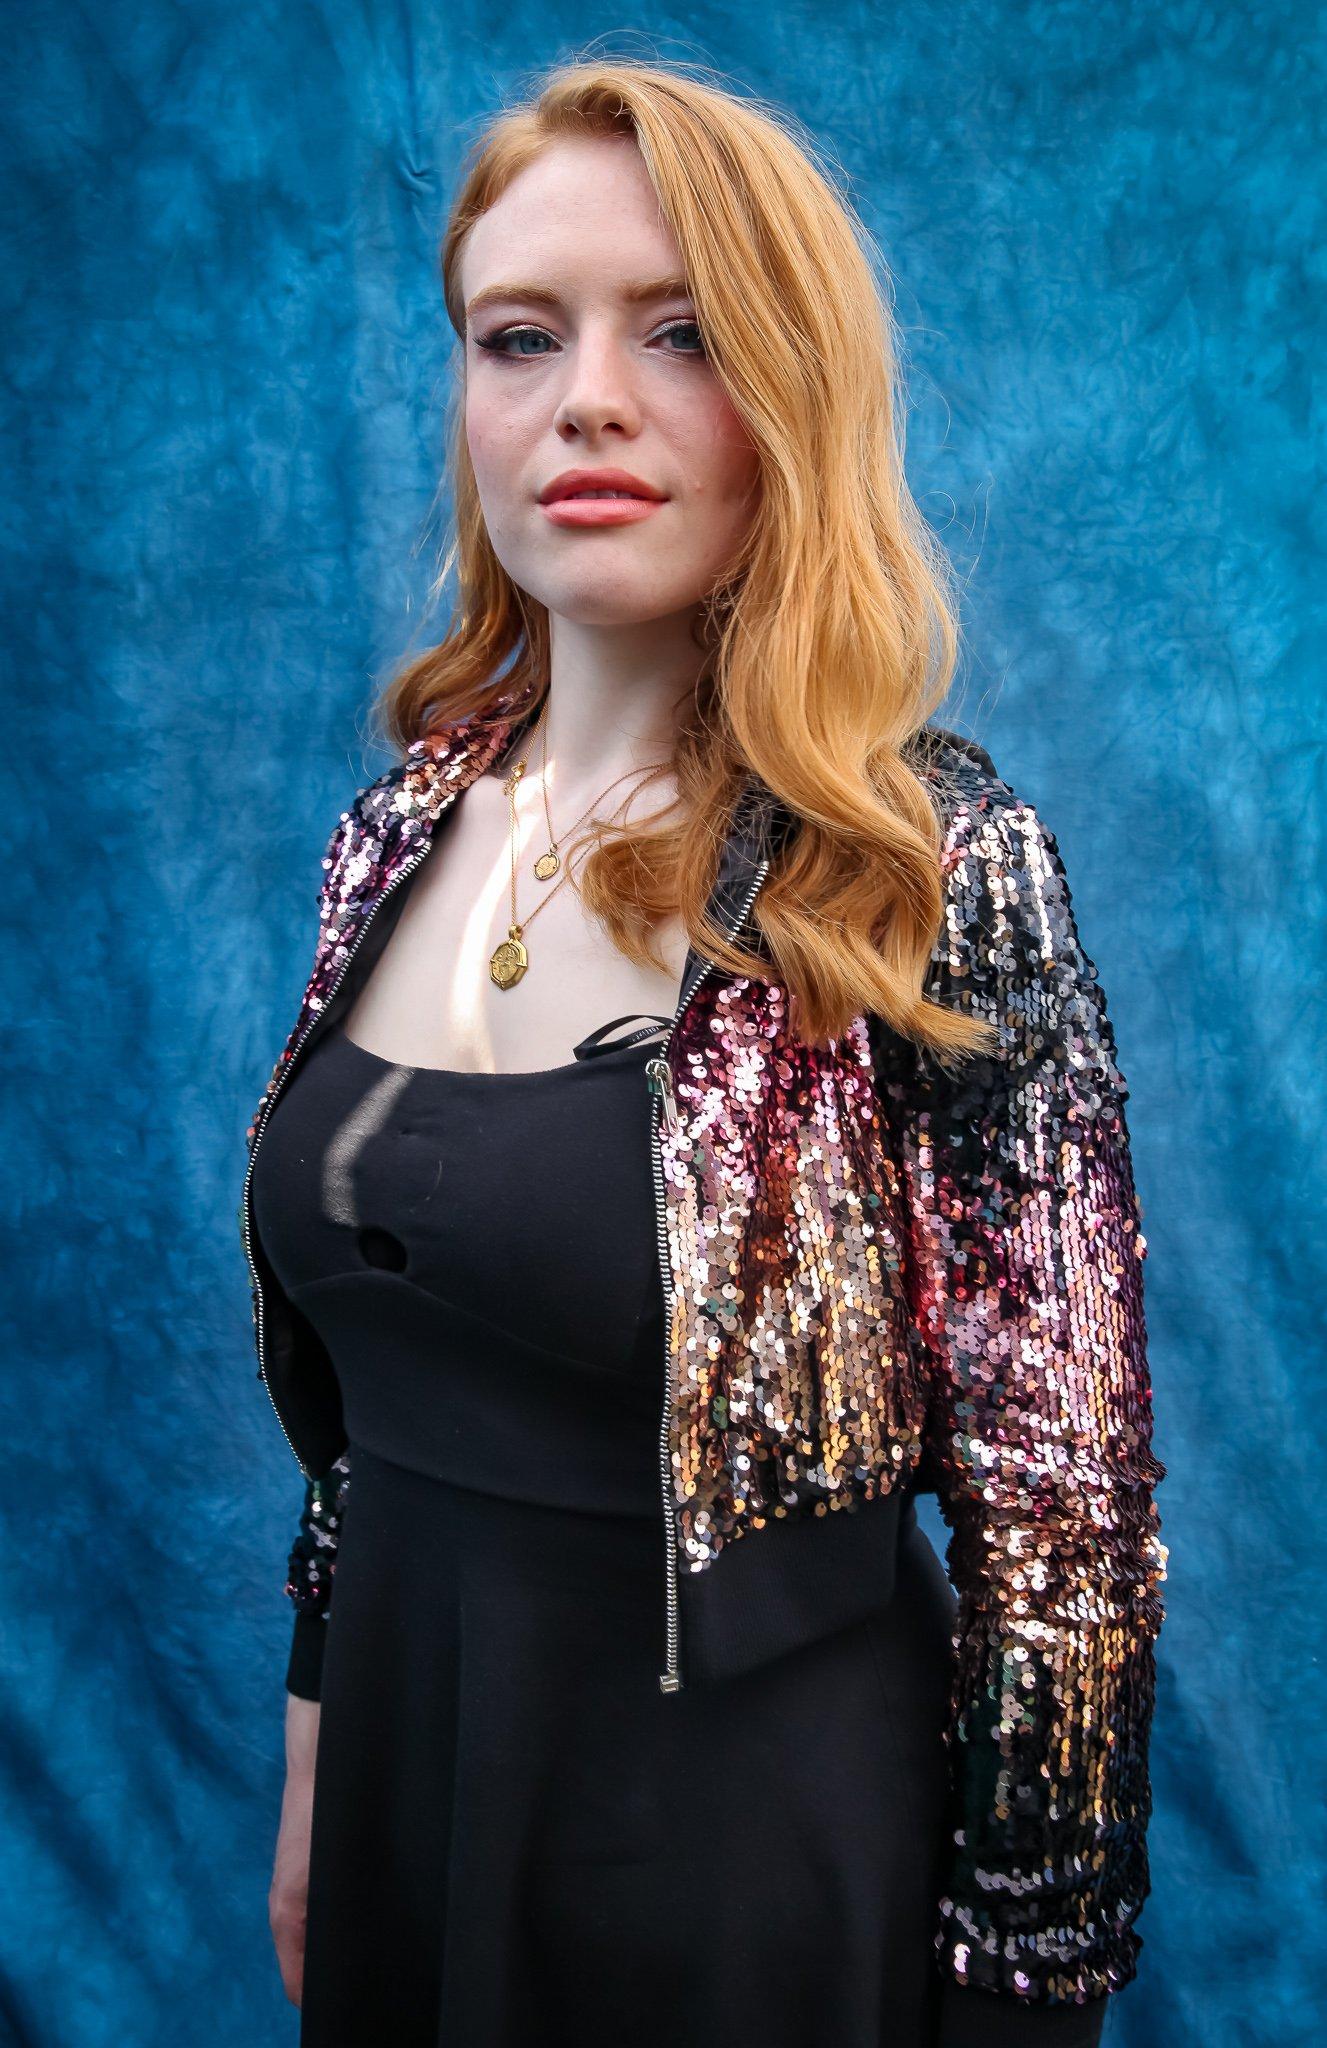 Freya Ridings On Sharing Personal Experiences pic